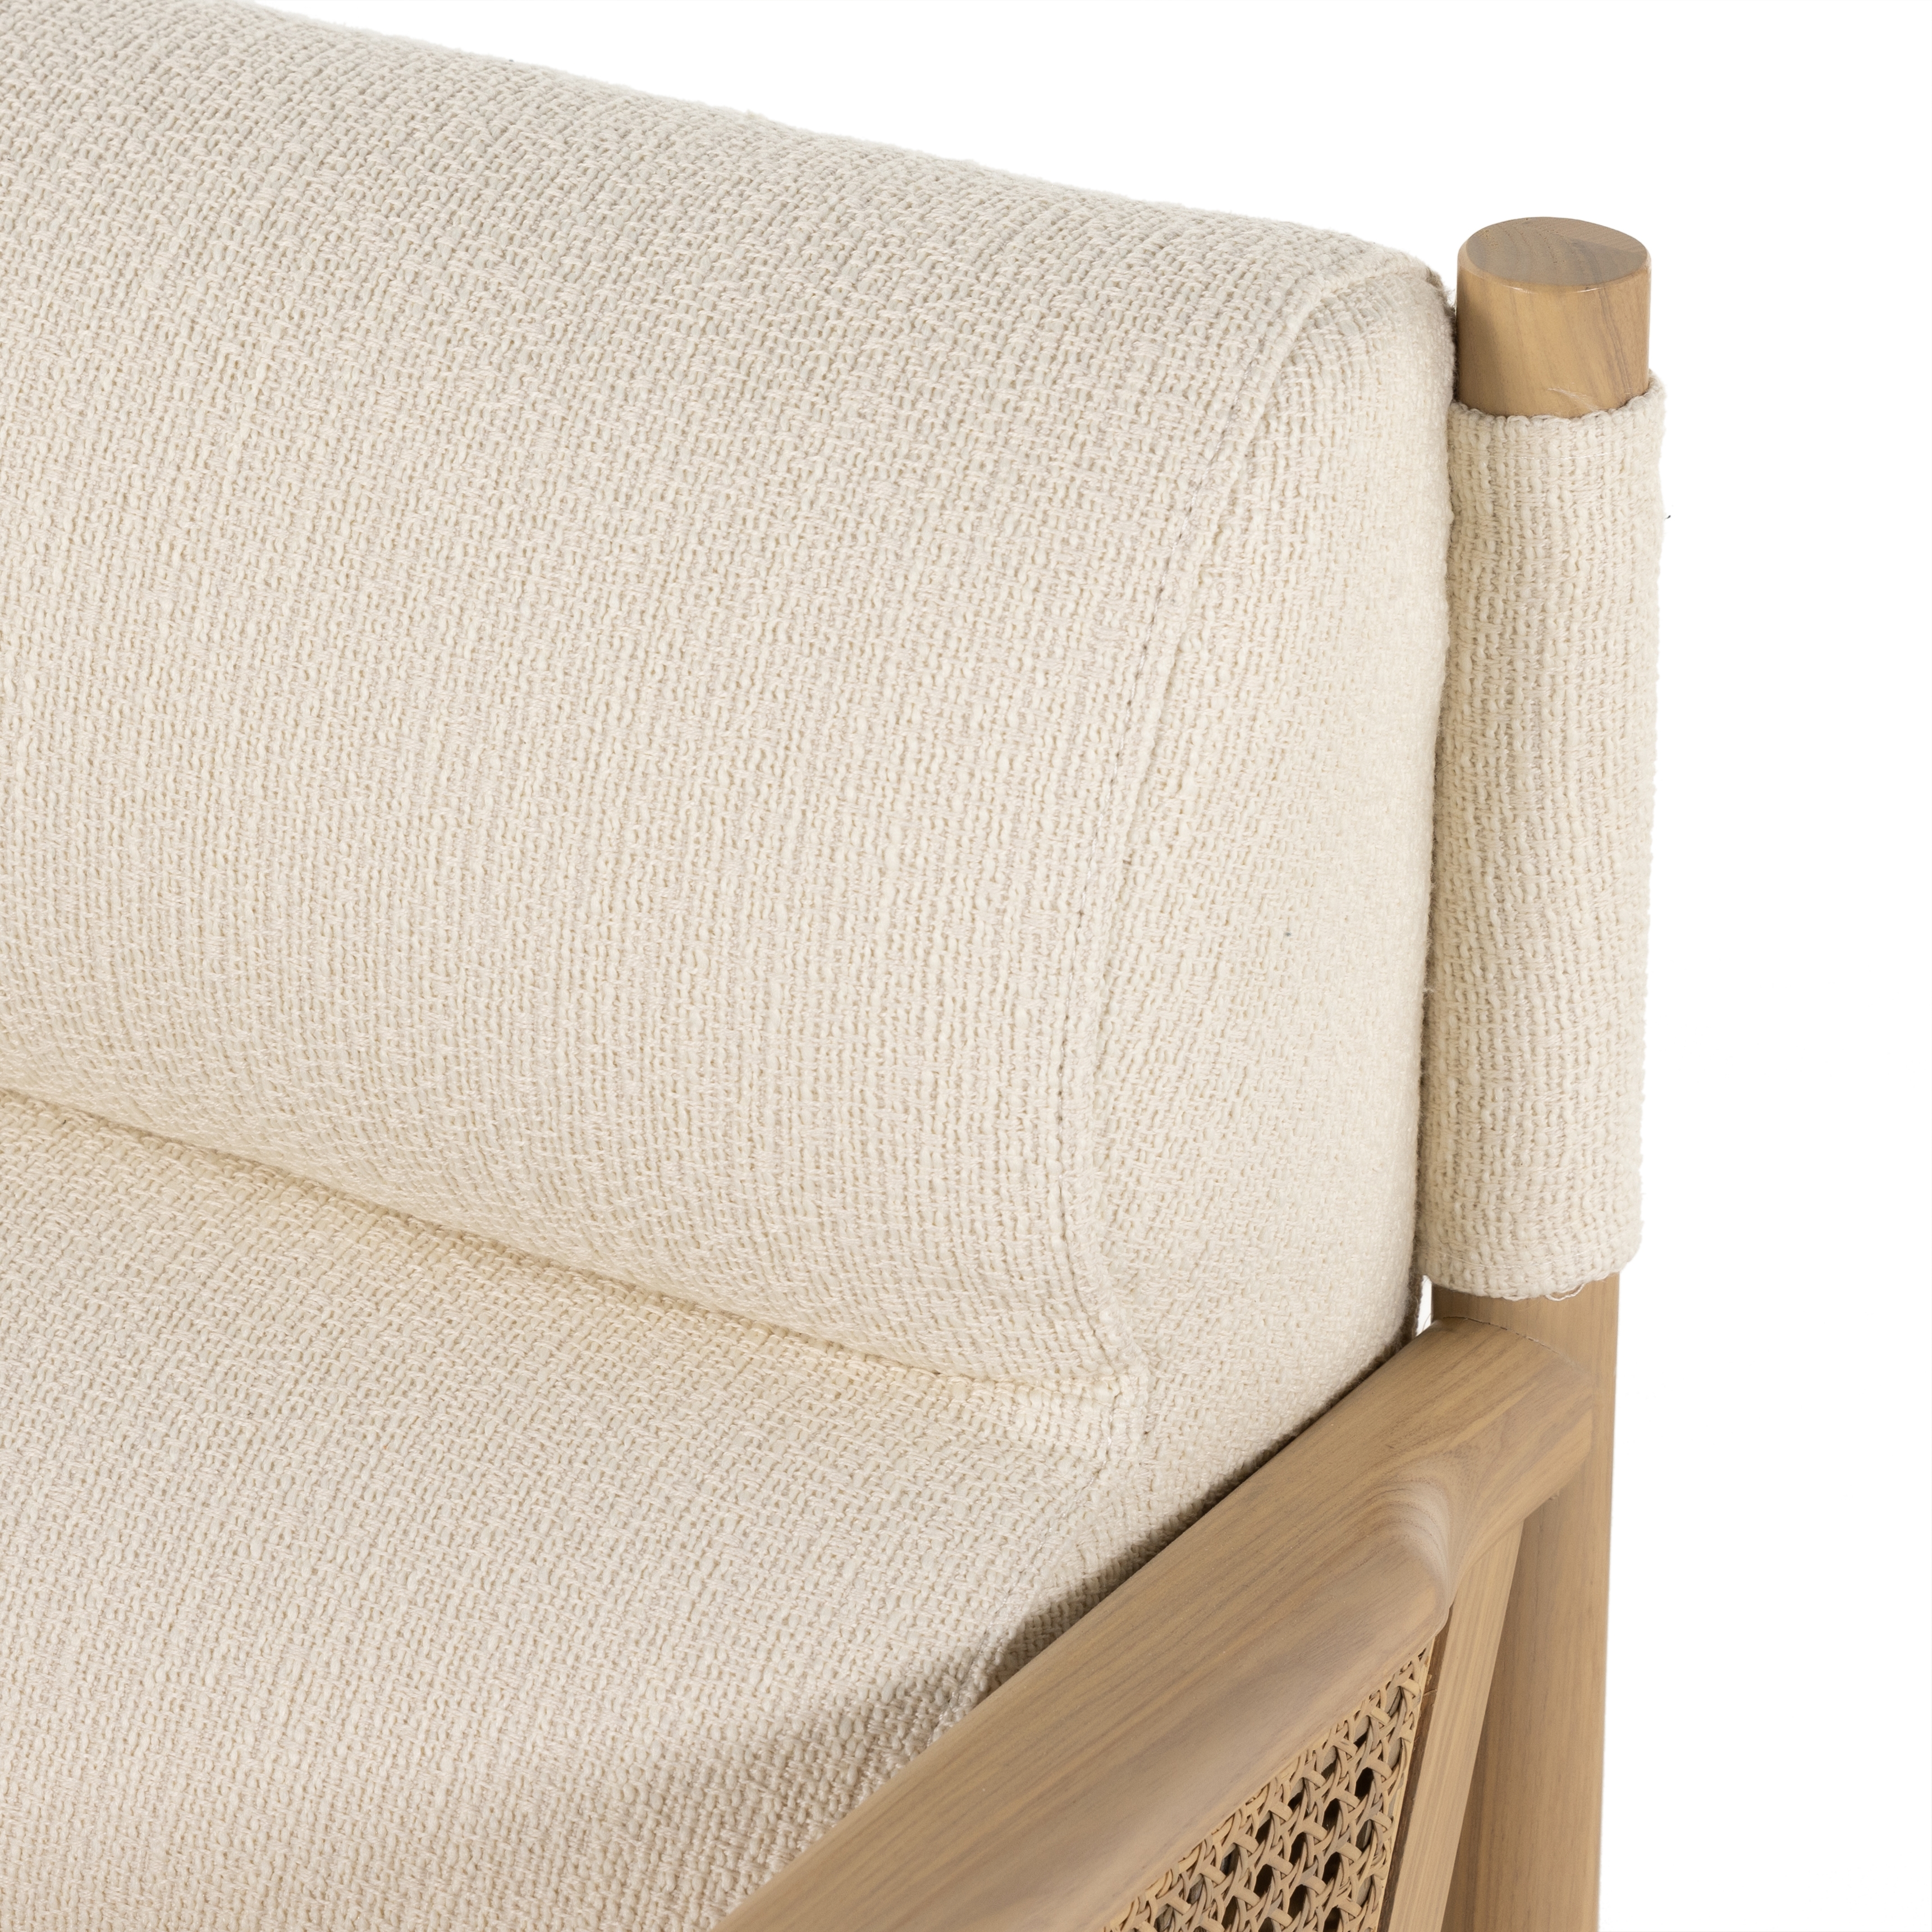 Kempsey Chair-Kerbey Ivory - Image 9